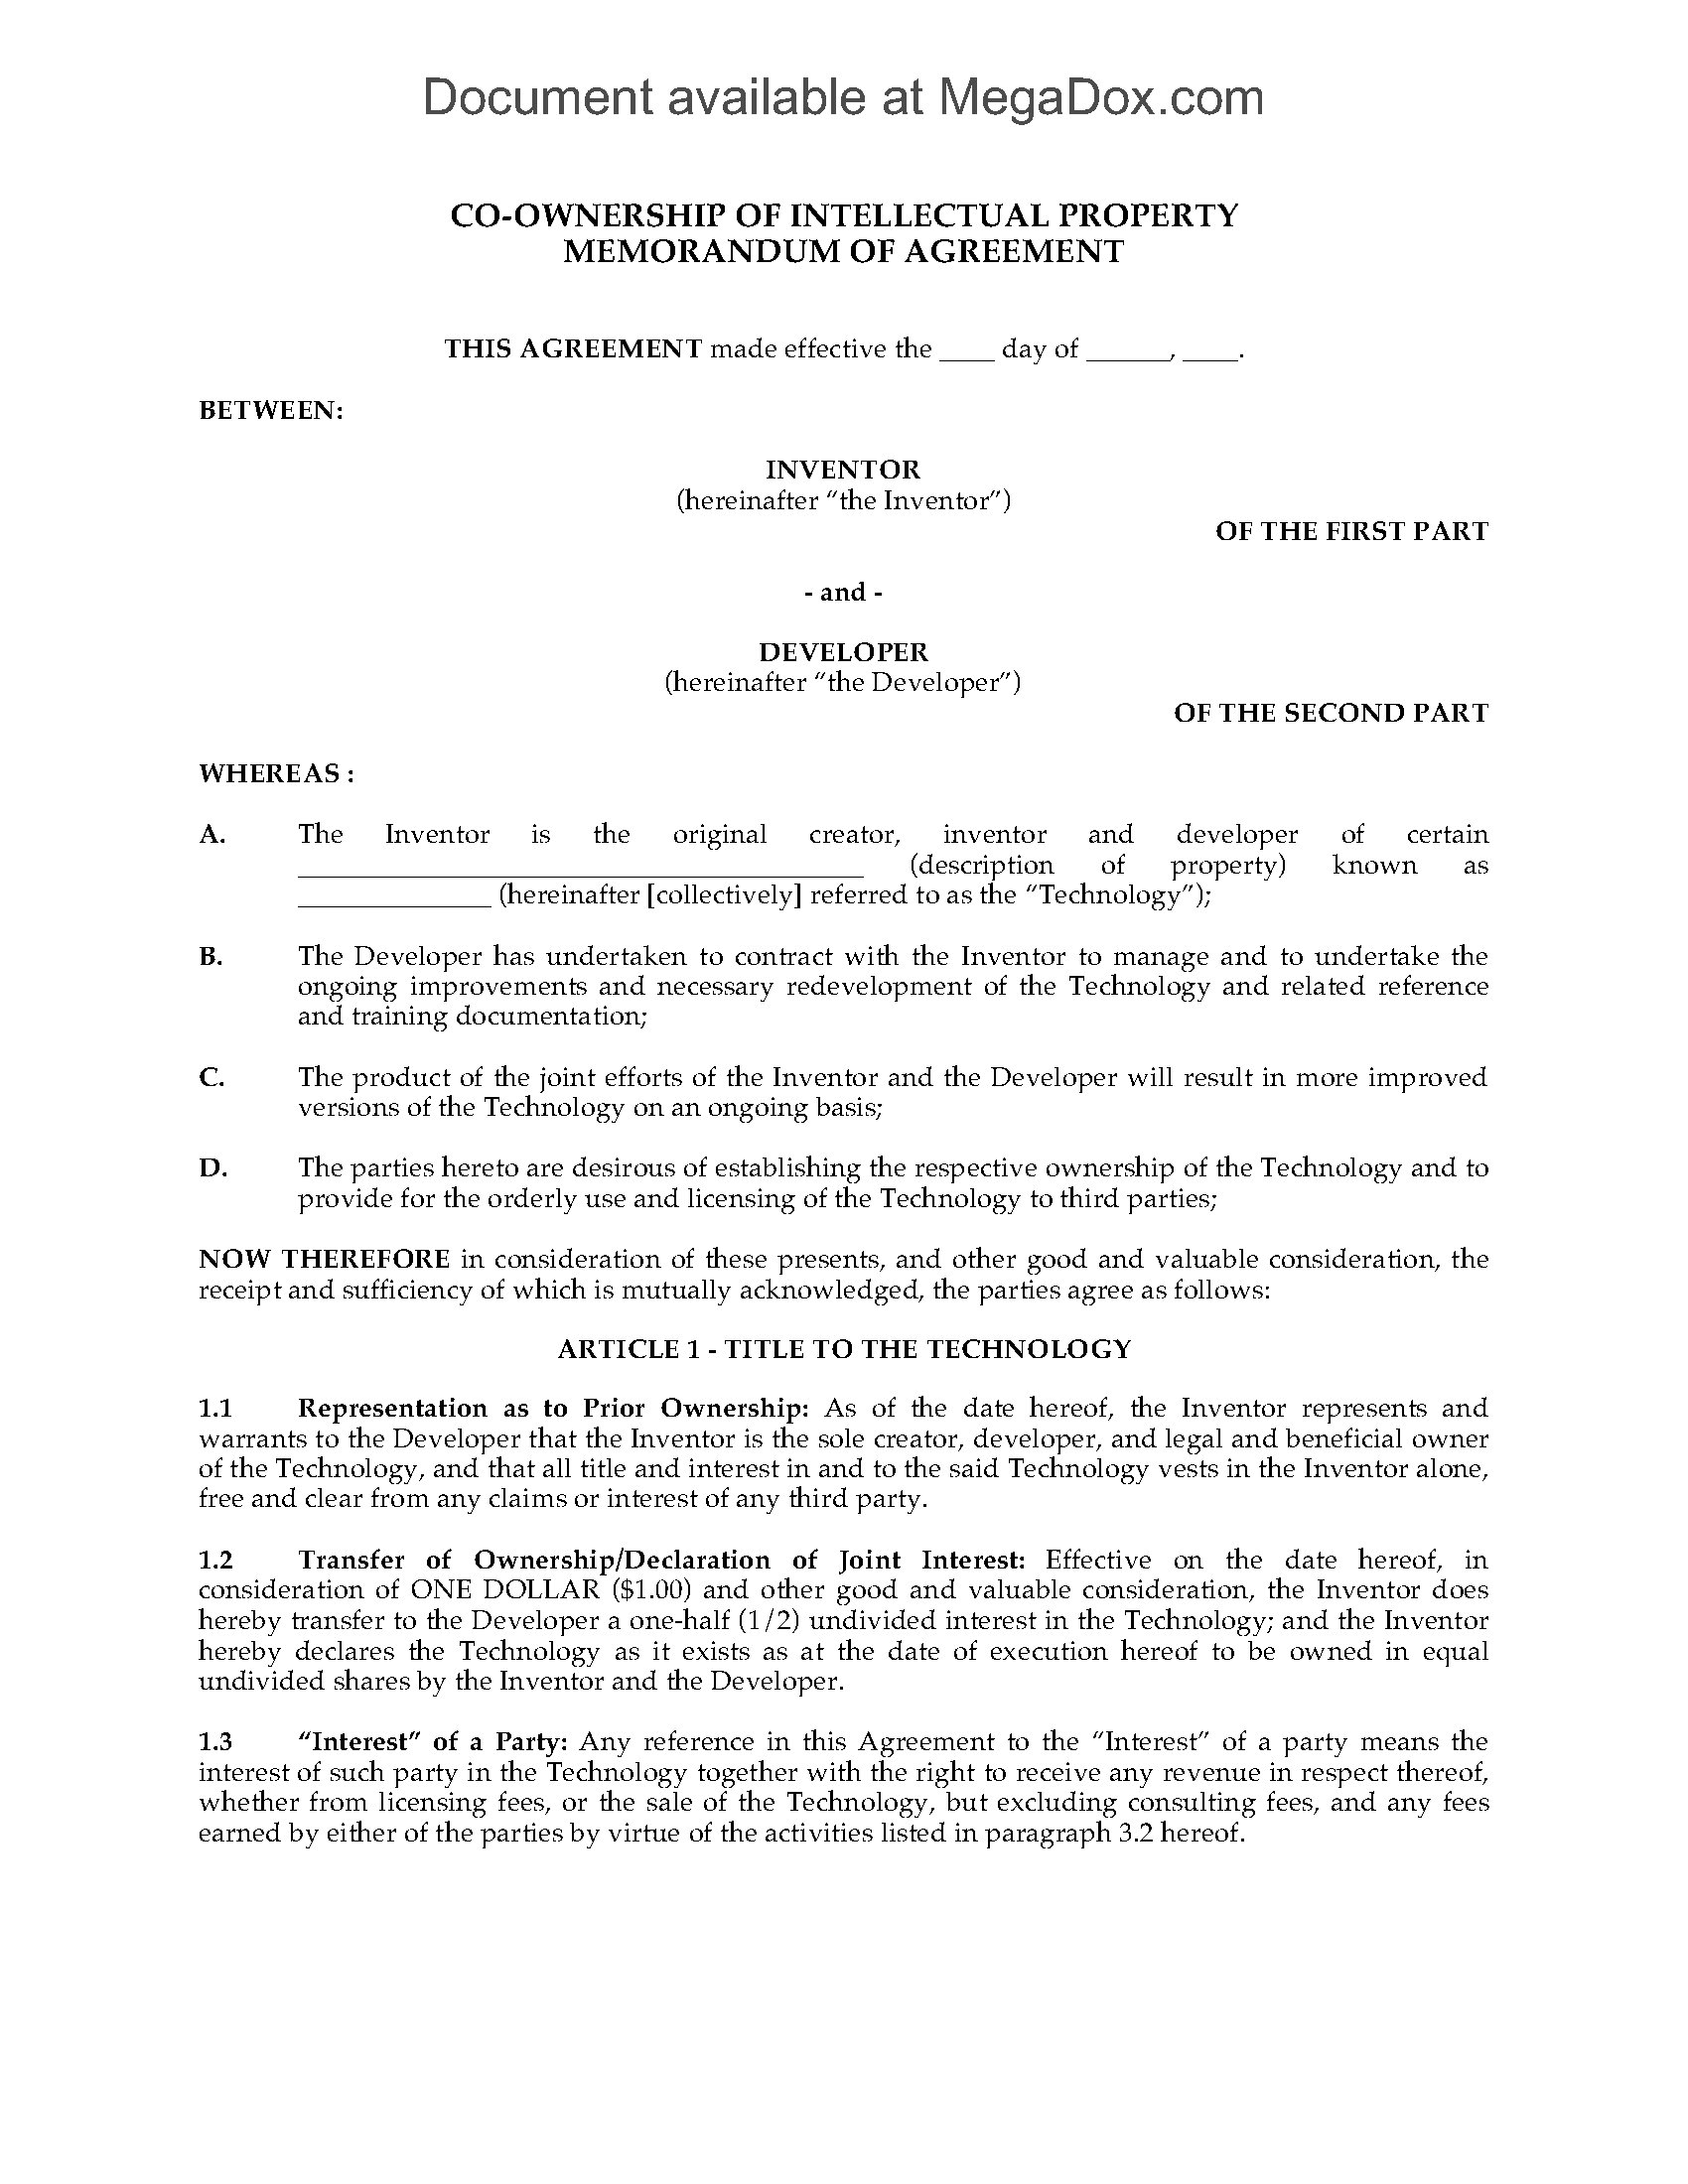 Intellectual Property Agreement Template from www.megadox.com